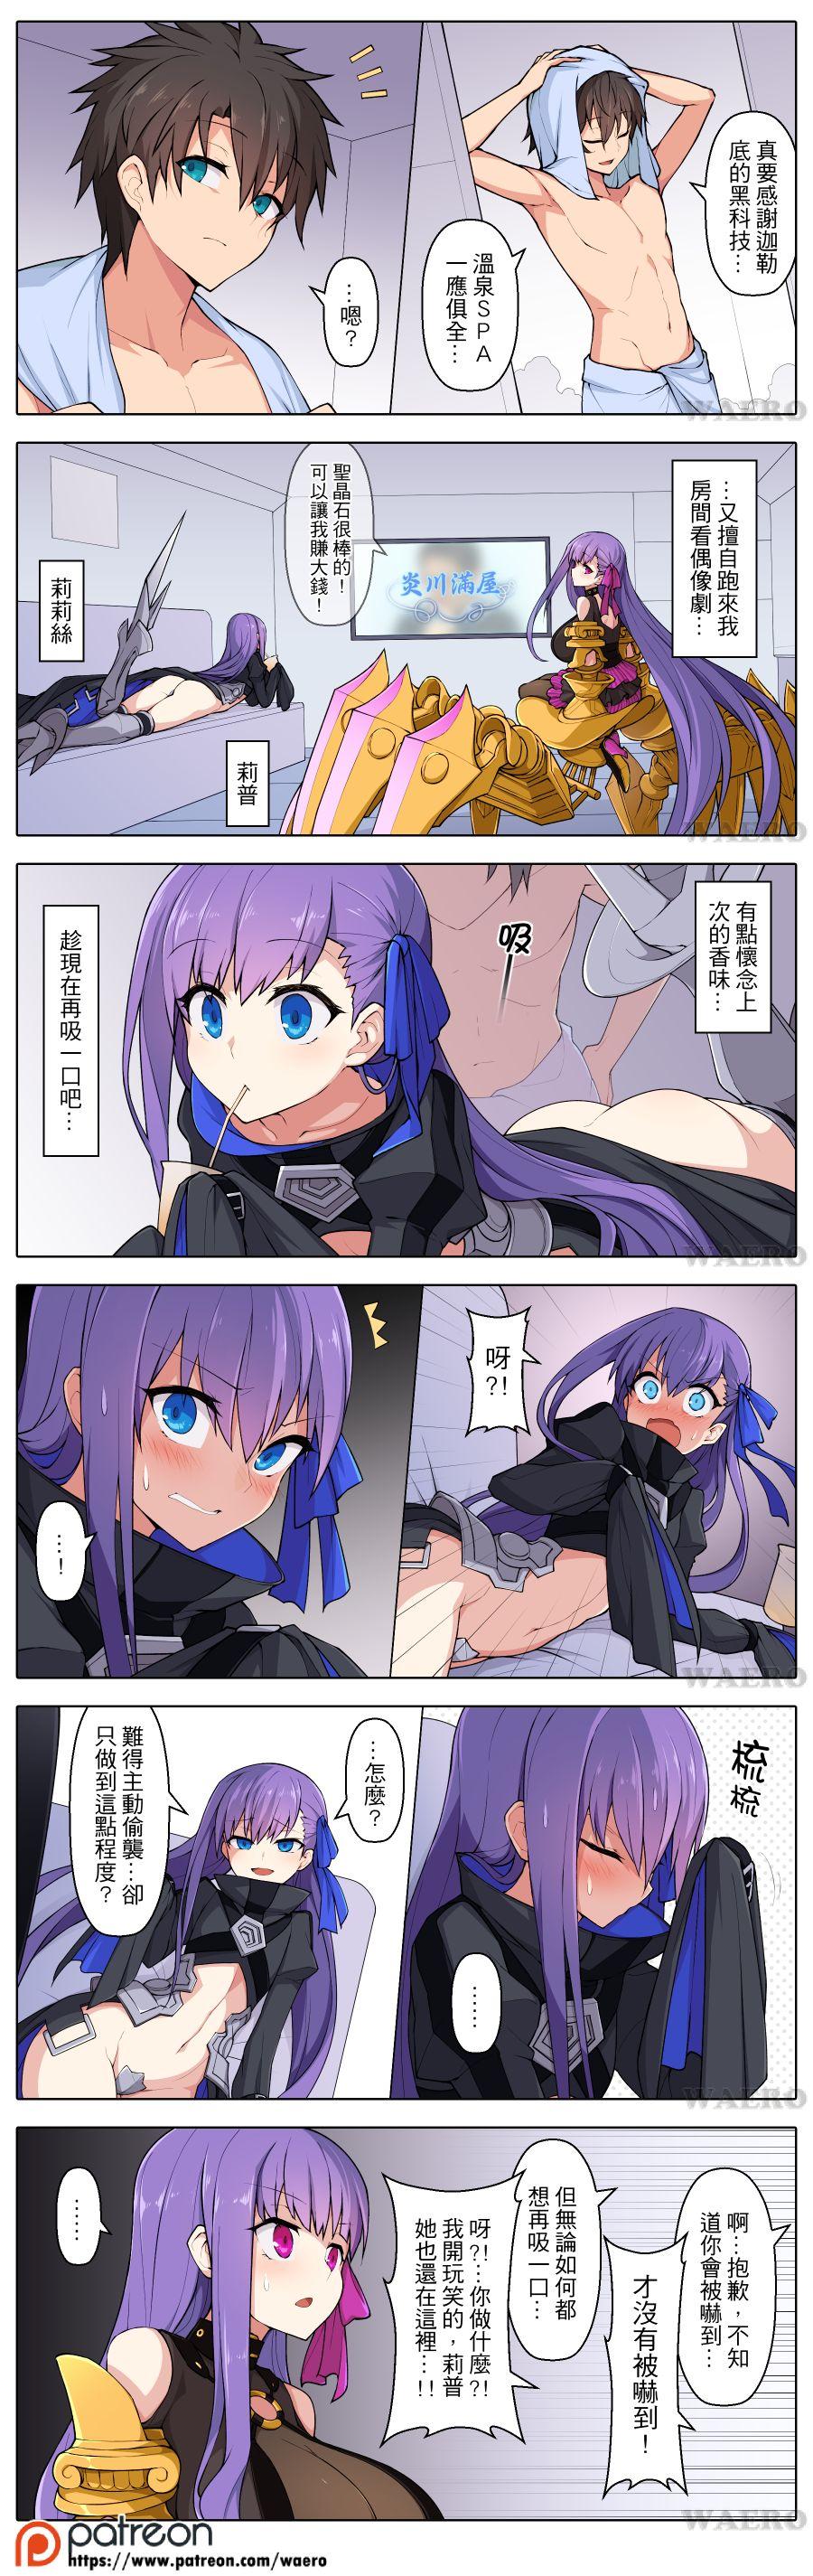 Sextape Lust Grand Order - Fate grand order Fucking Hard - Page 3